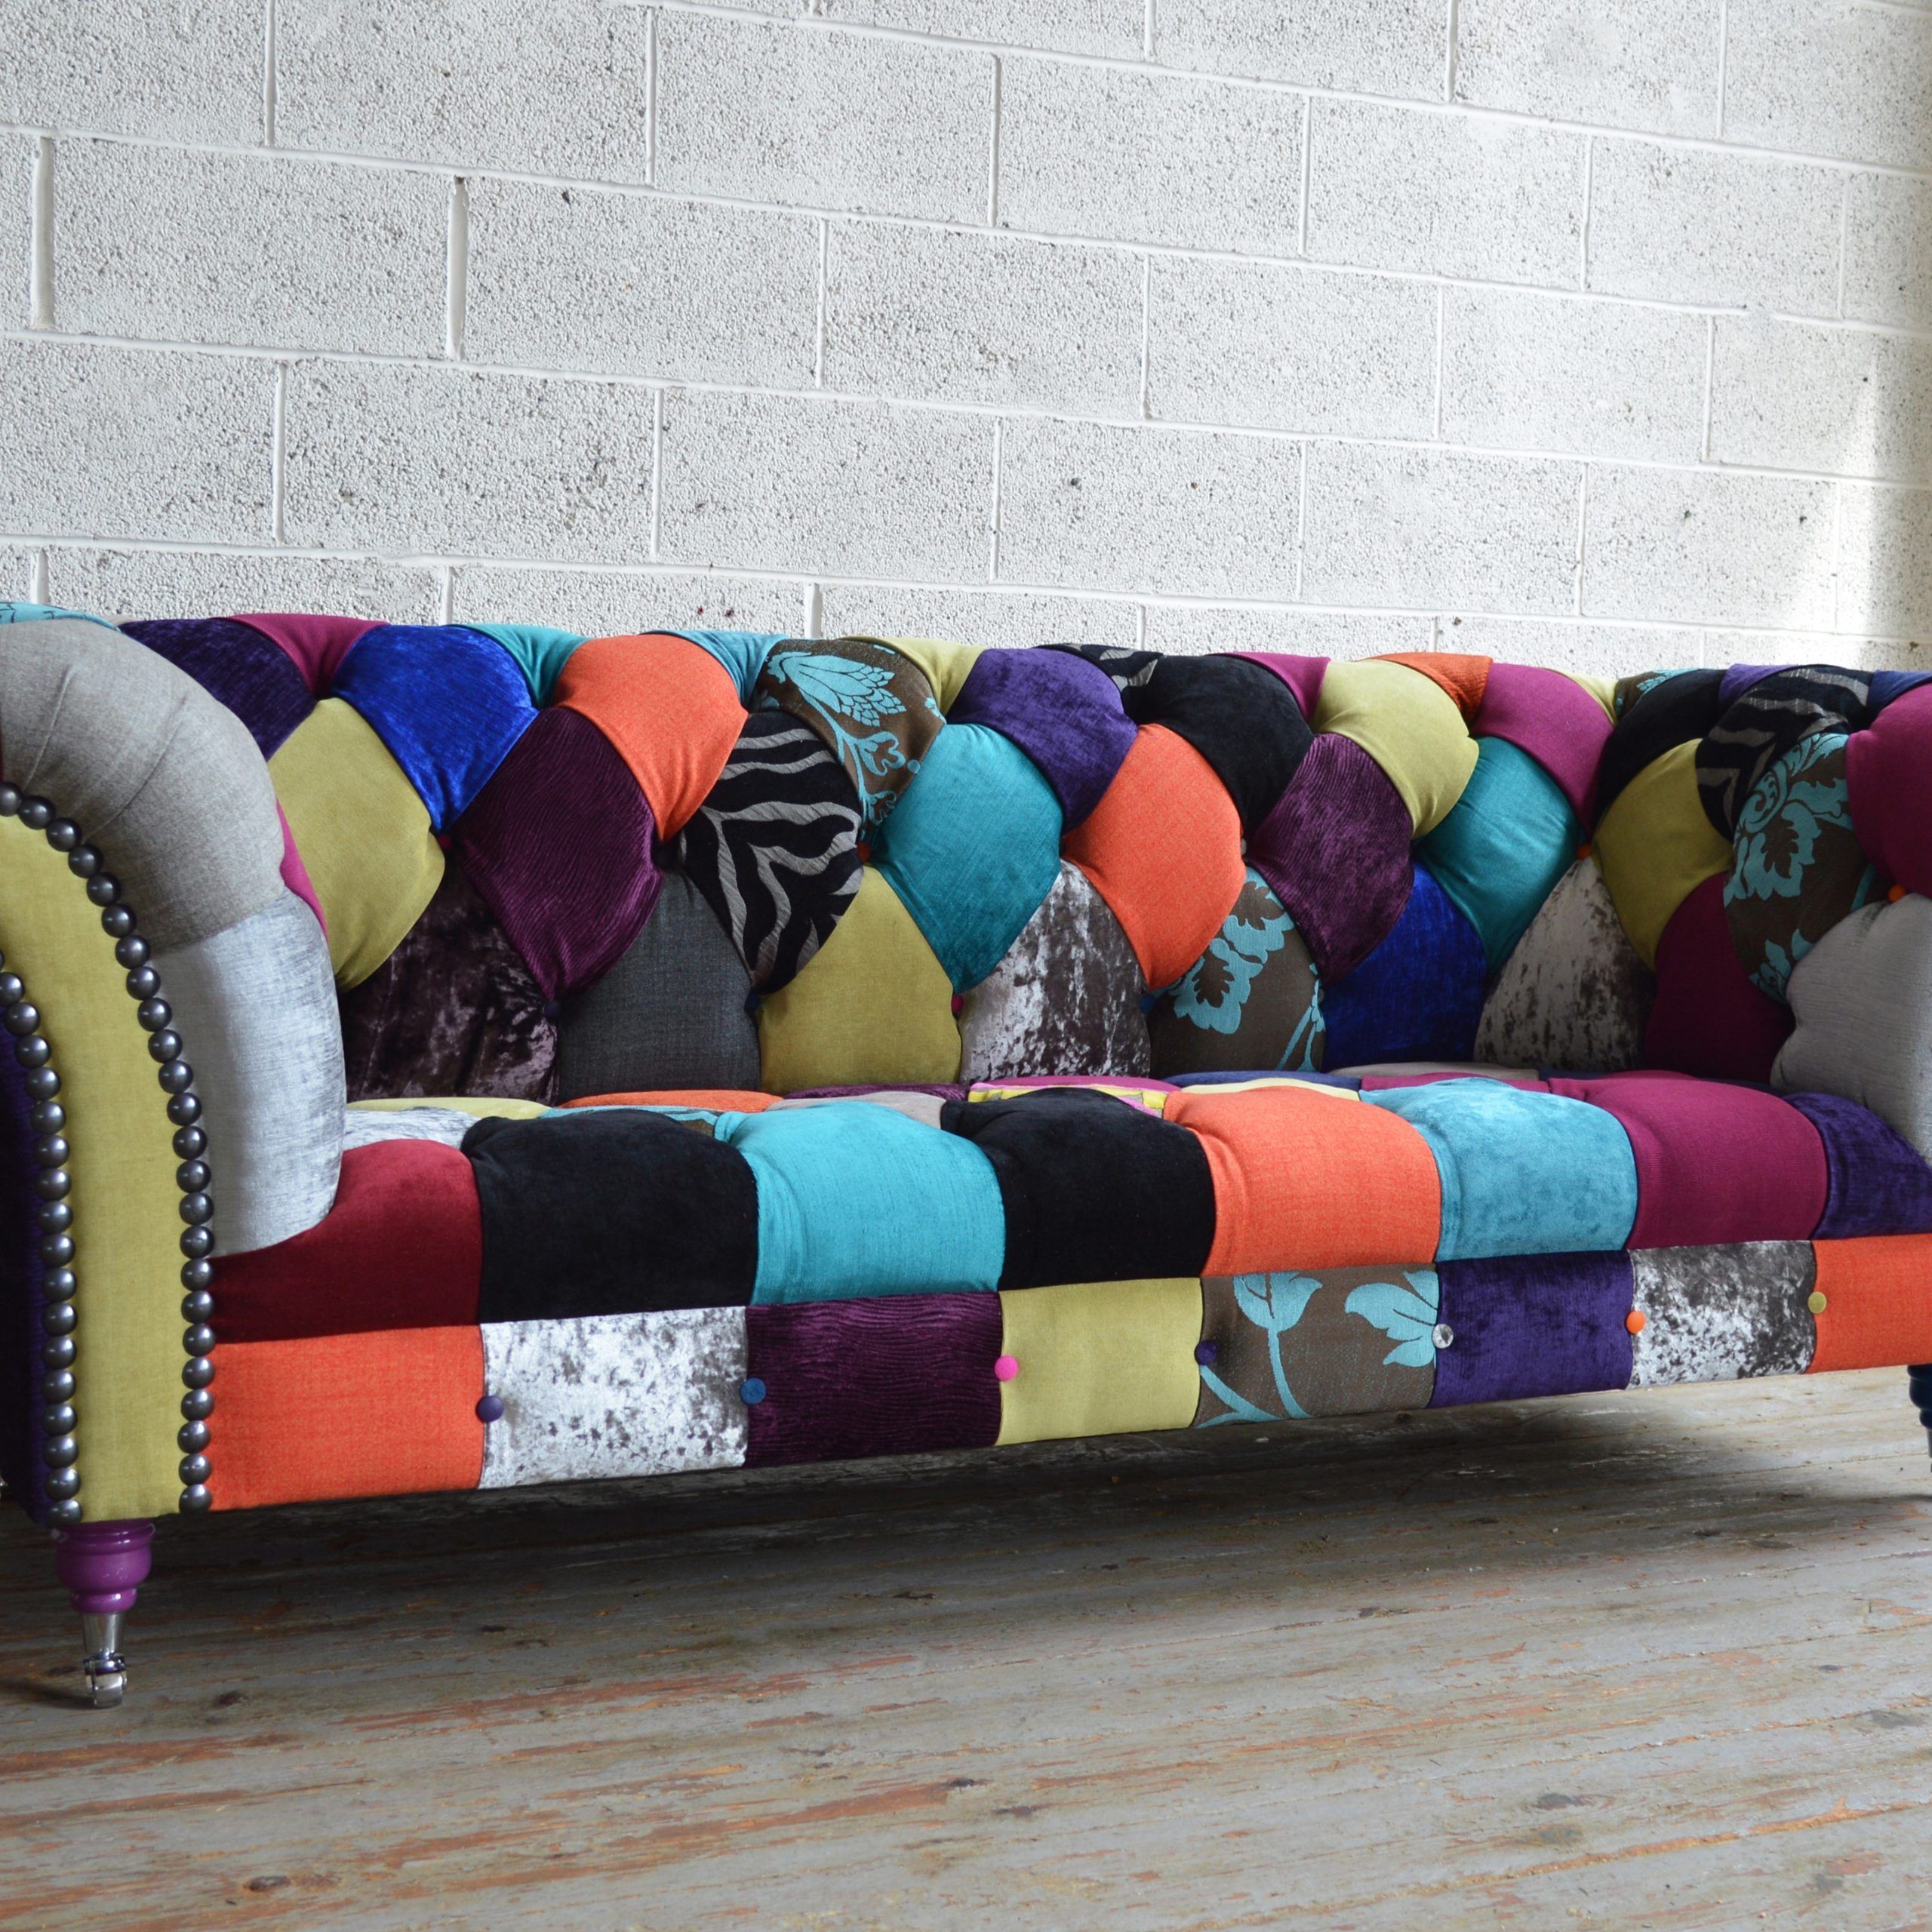 7 Images Multi Coloured Sofas And Review – Alqu Blog With Sofas In Multiple Colors (View 14 of 20)